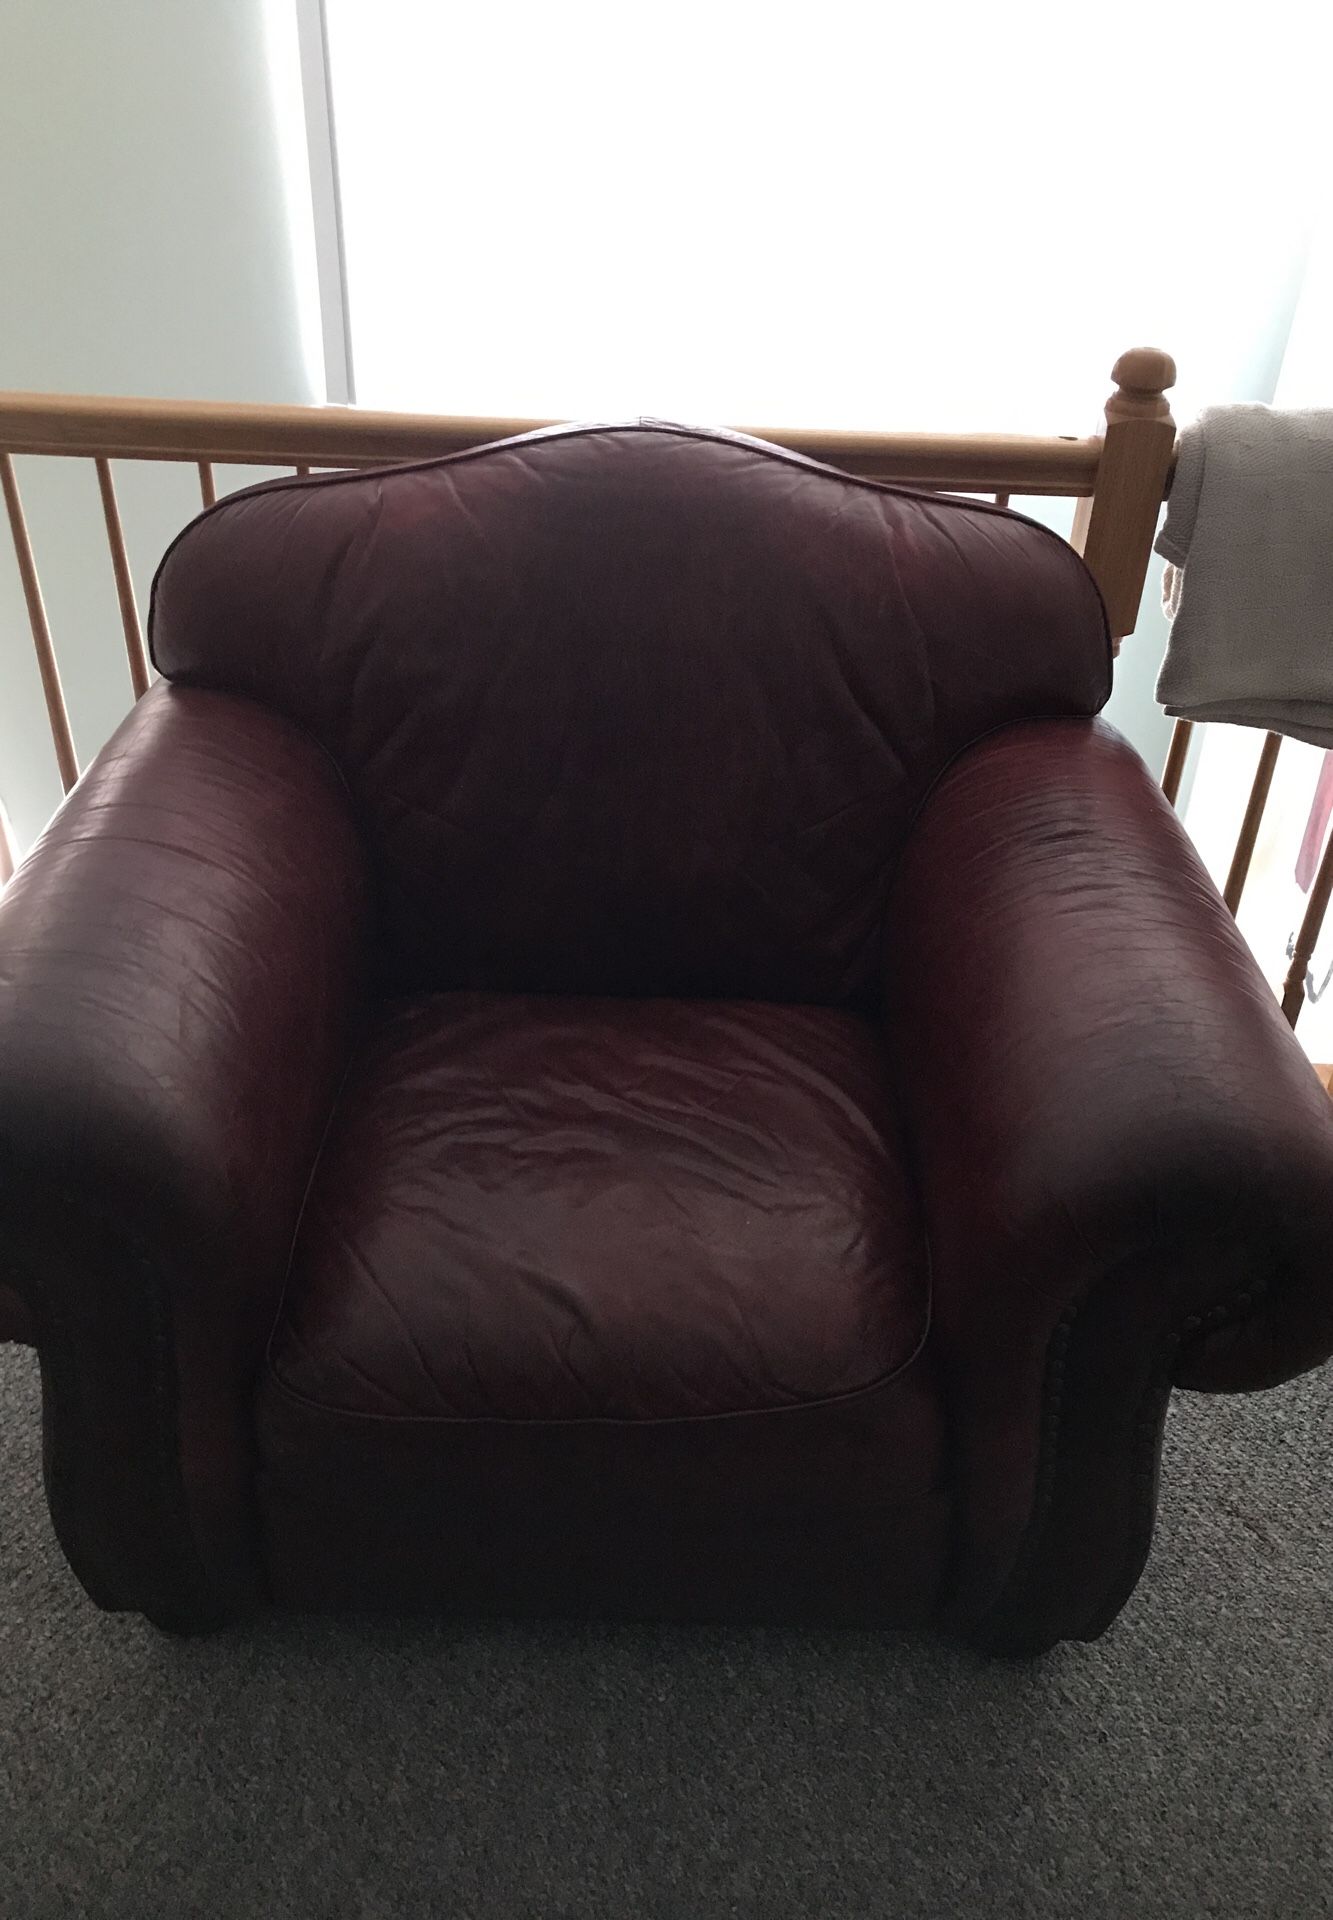 Oversized leather chair